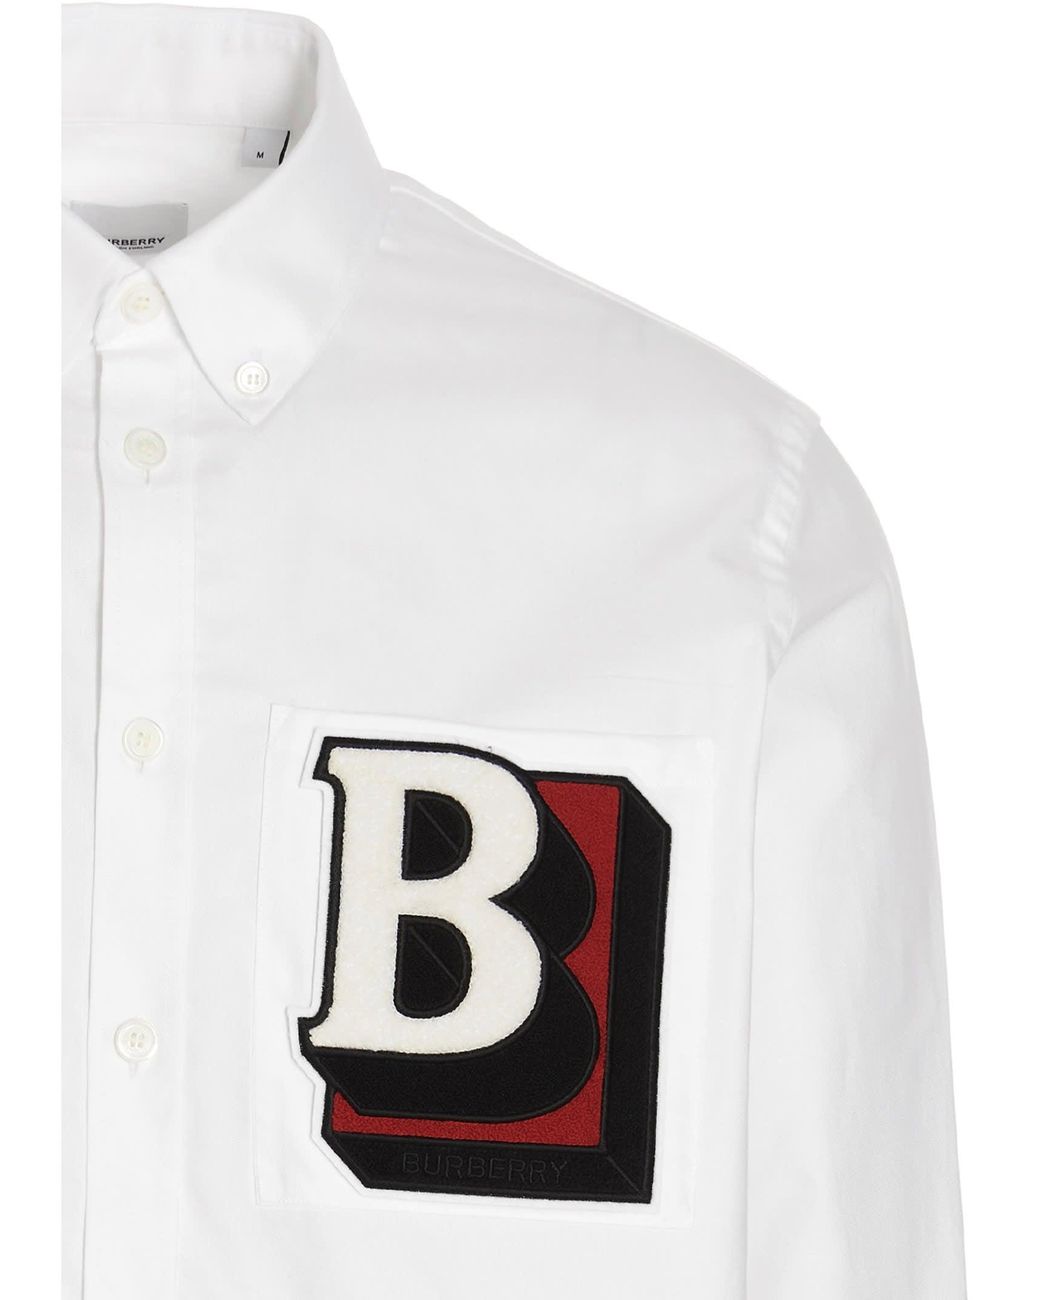 Burberry Cotton Shirt in White for Men - Save 64% | Lyst